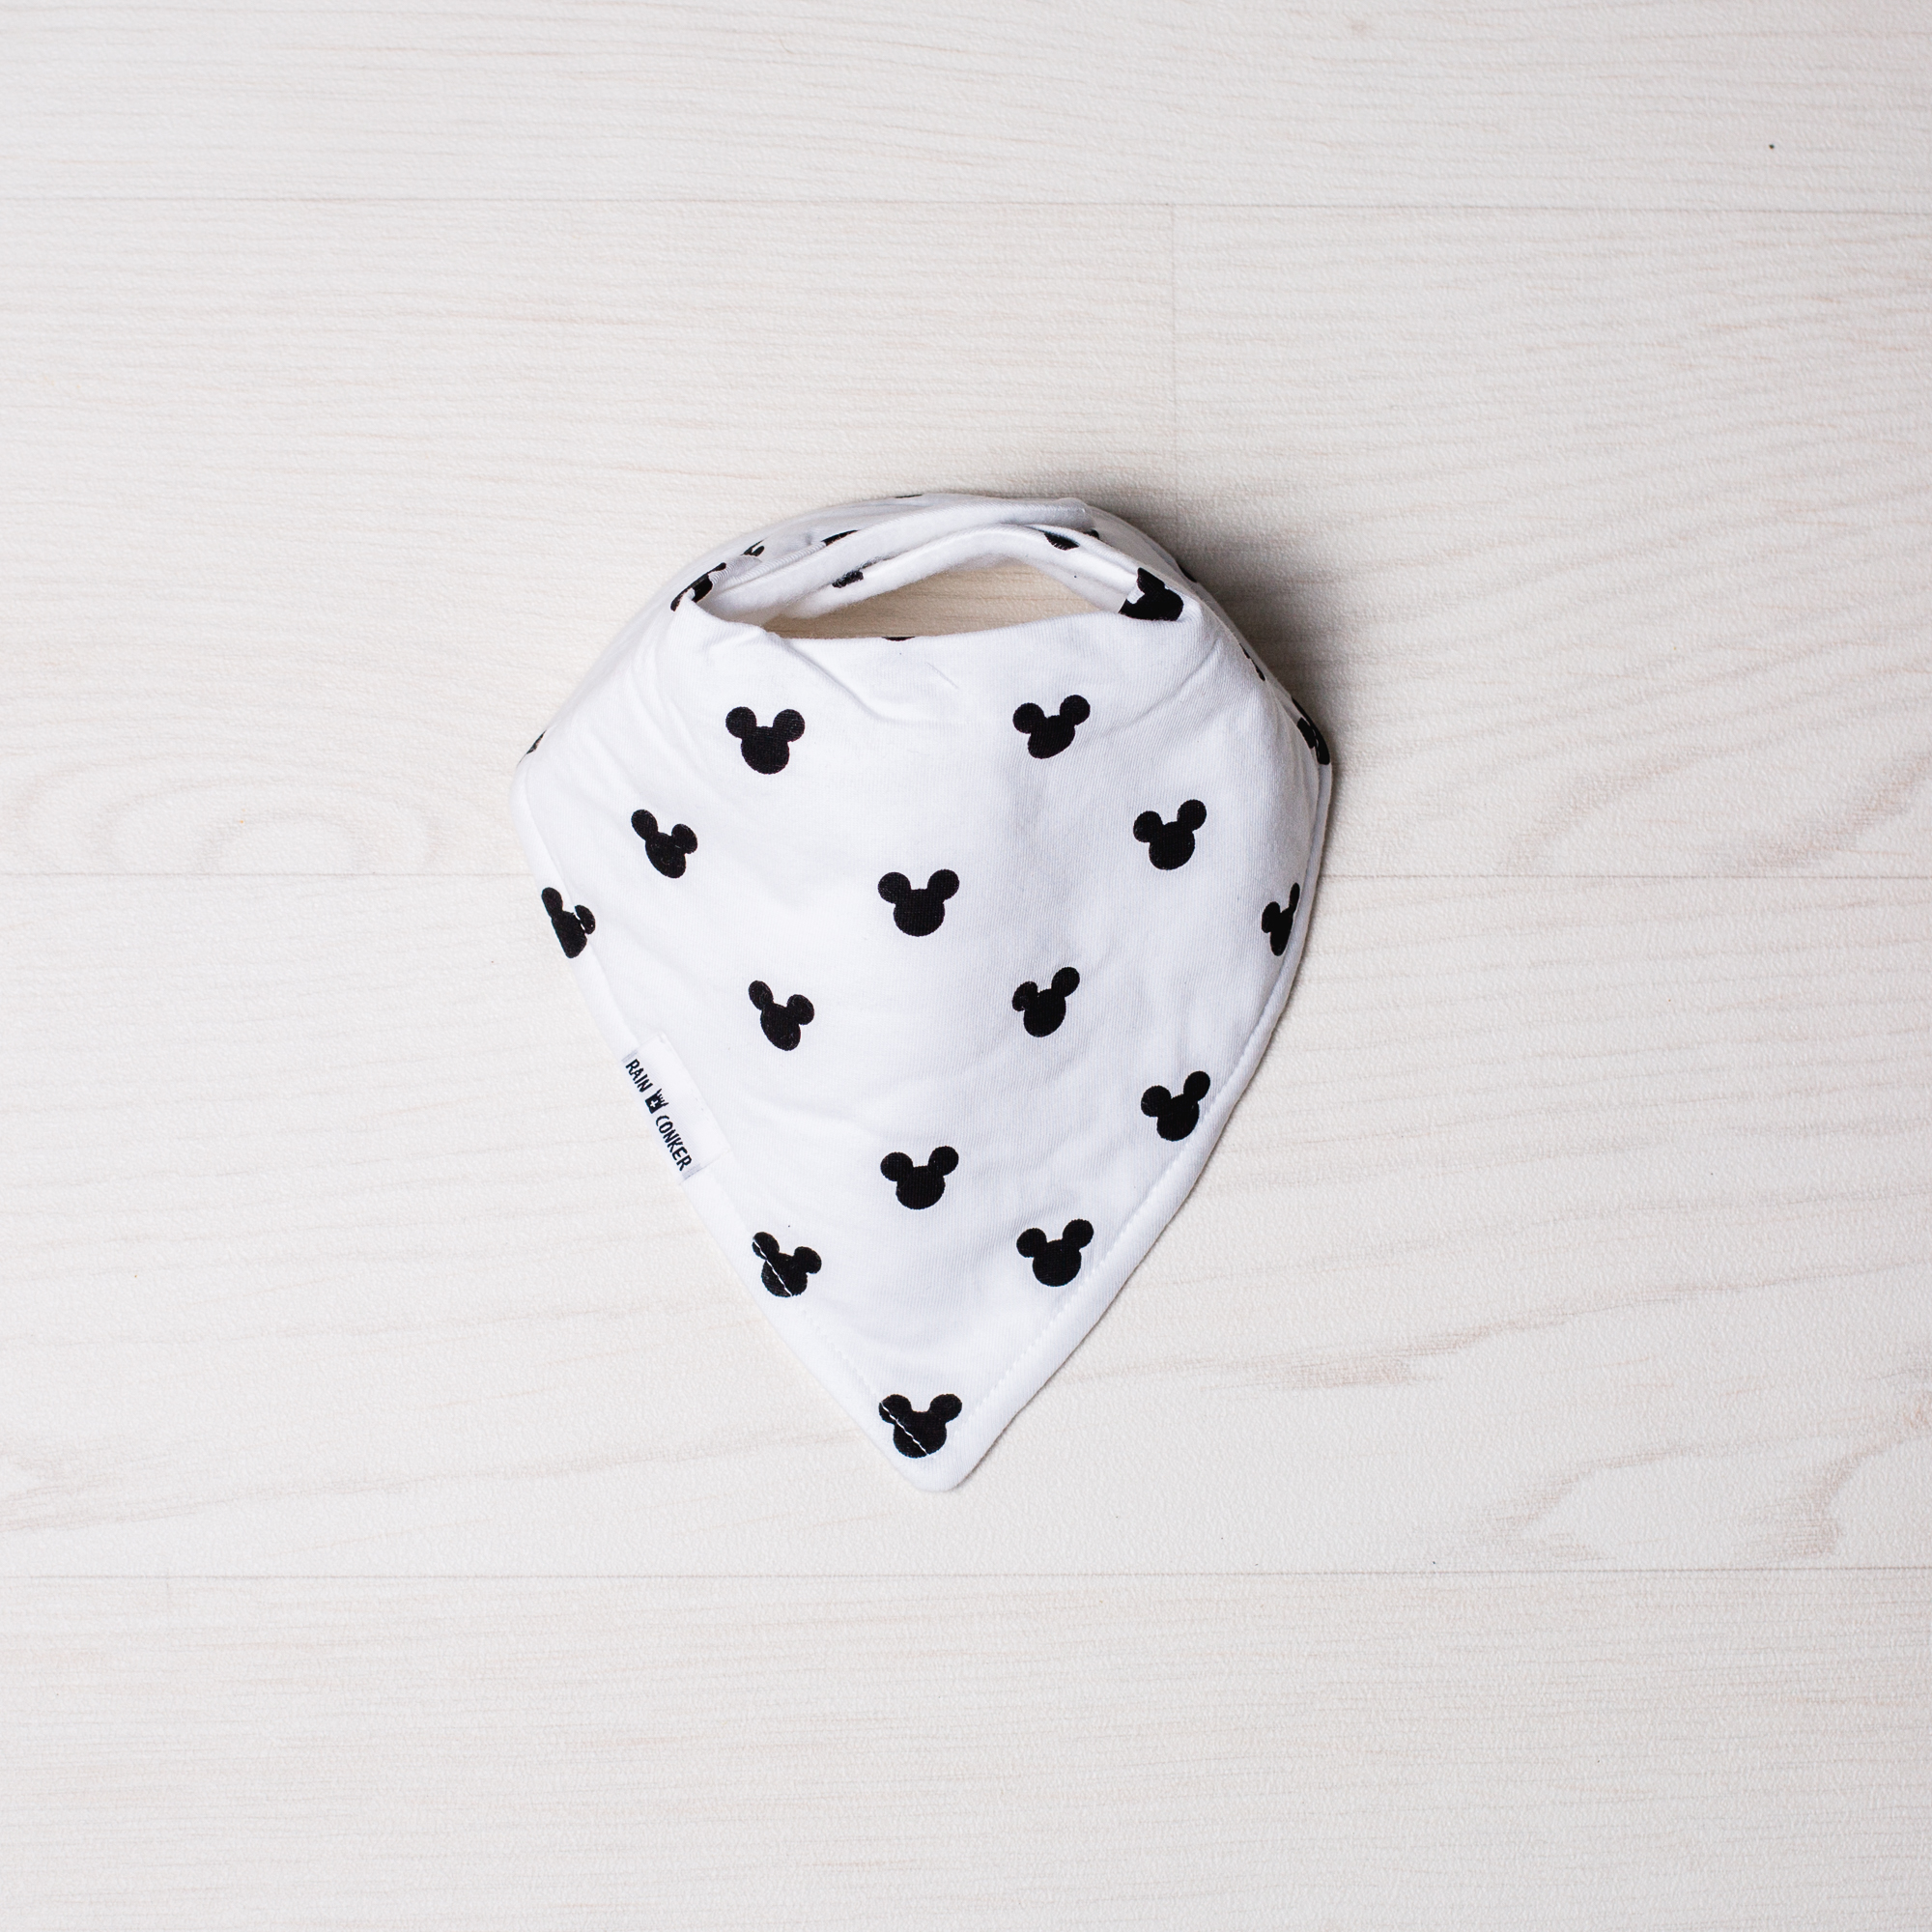 Cute Bandana Bibs for Sale. Grab your selective product from a huge collection.